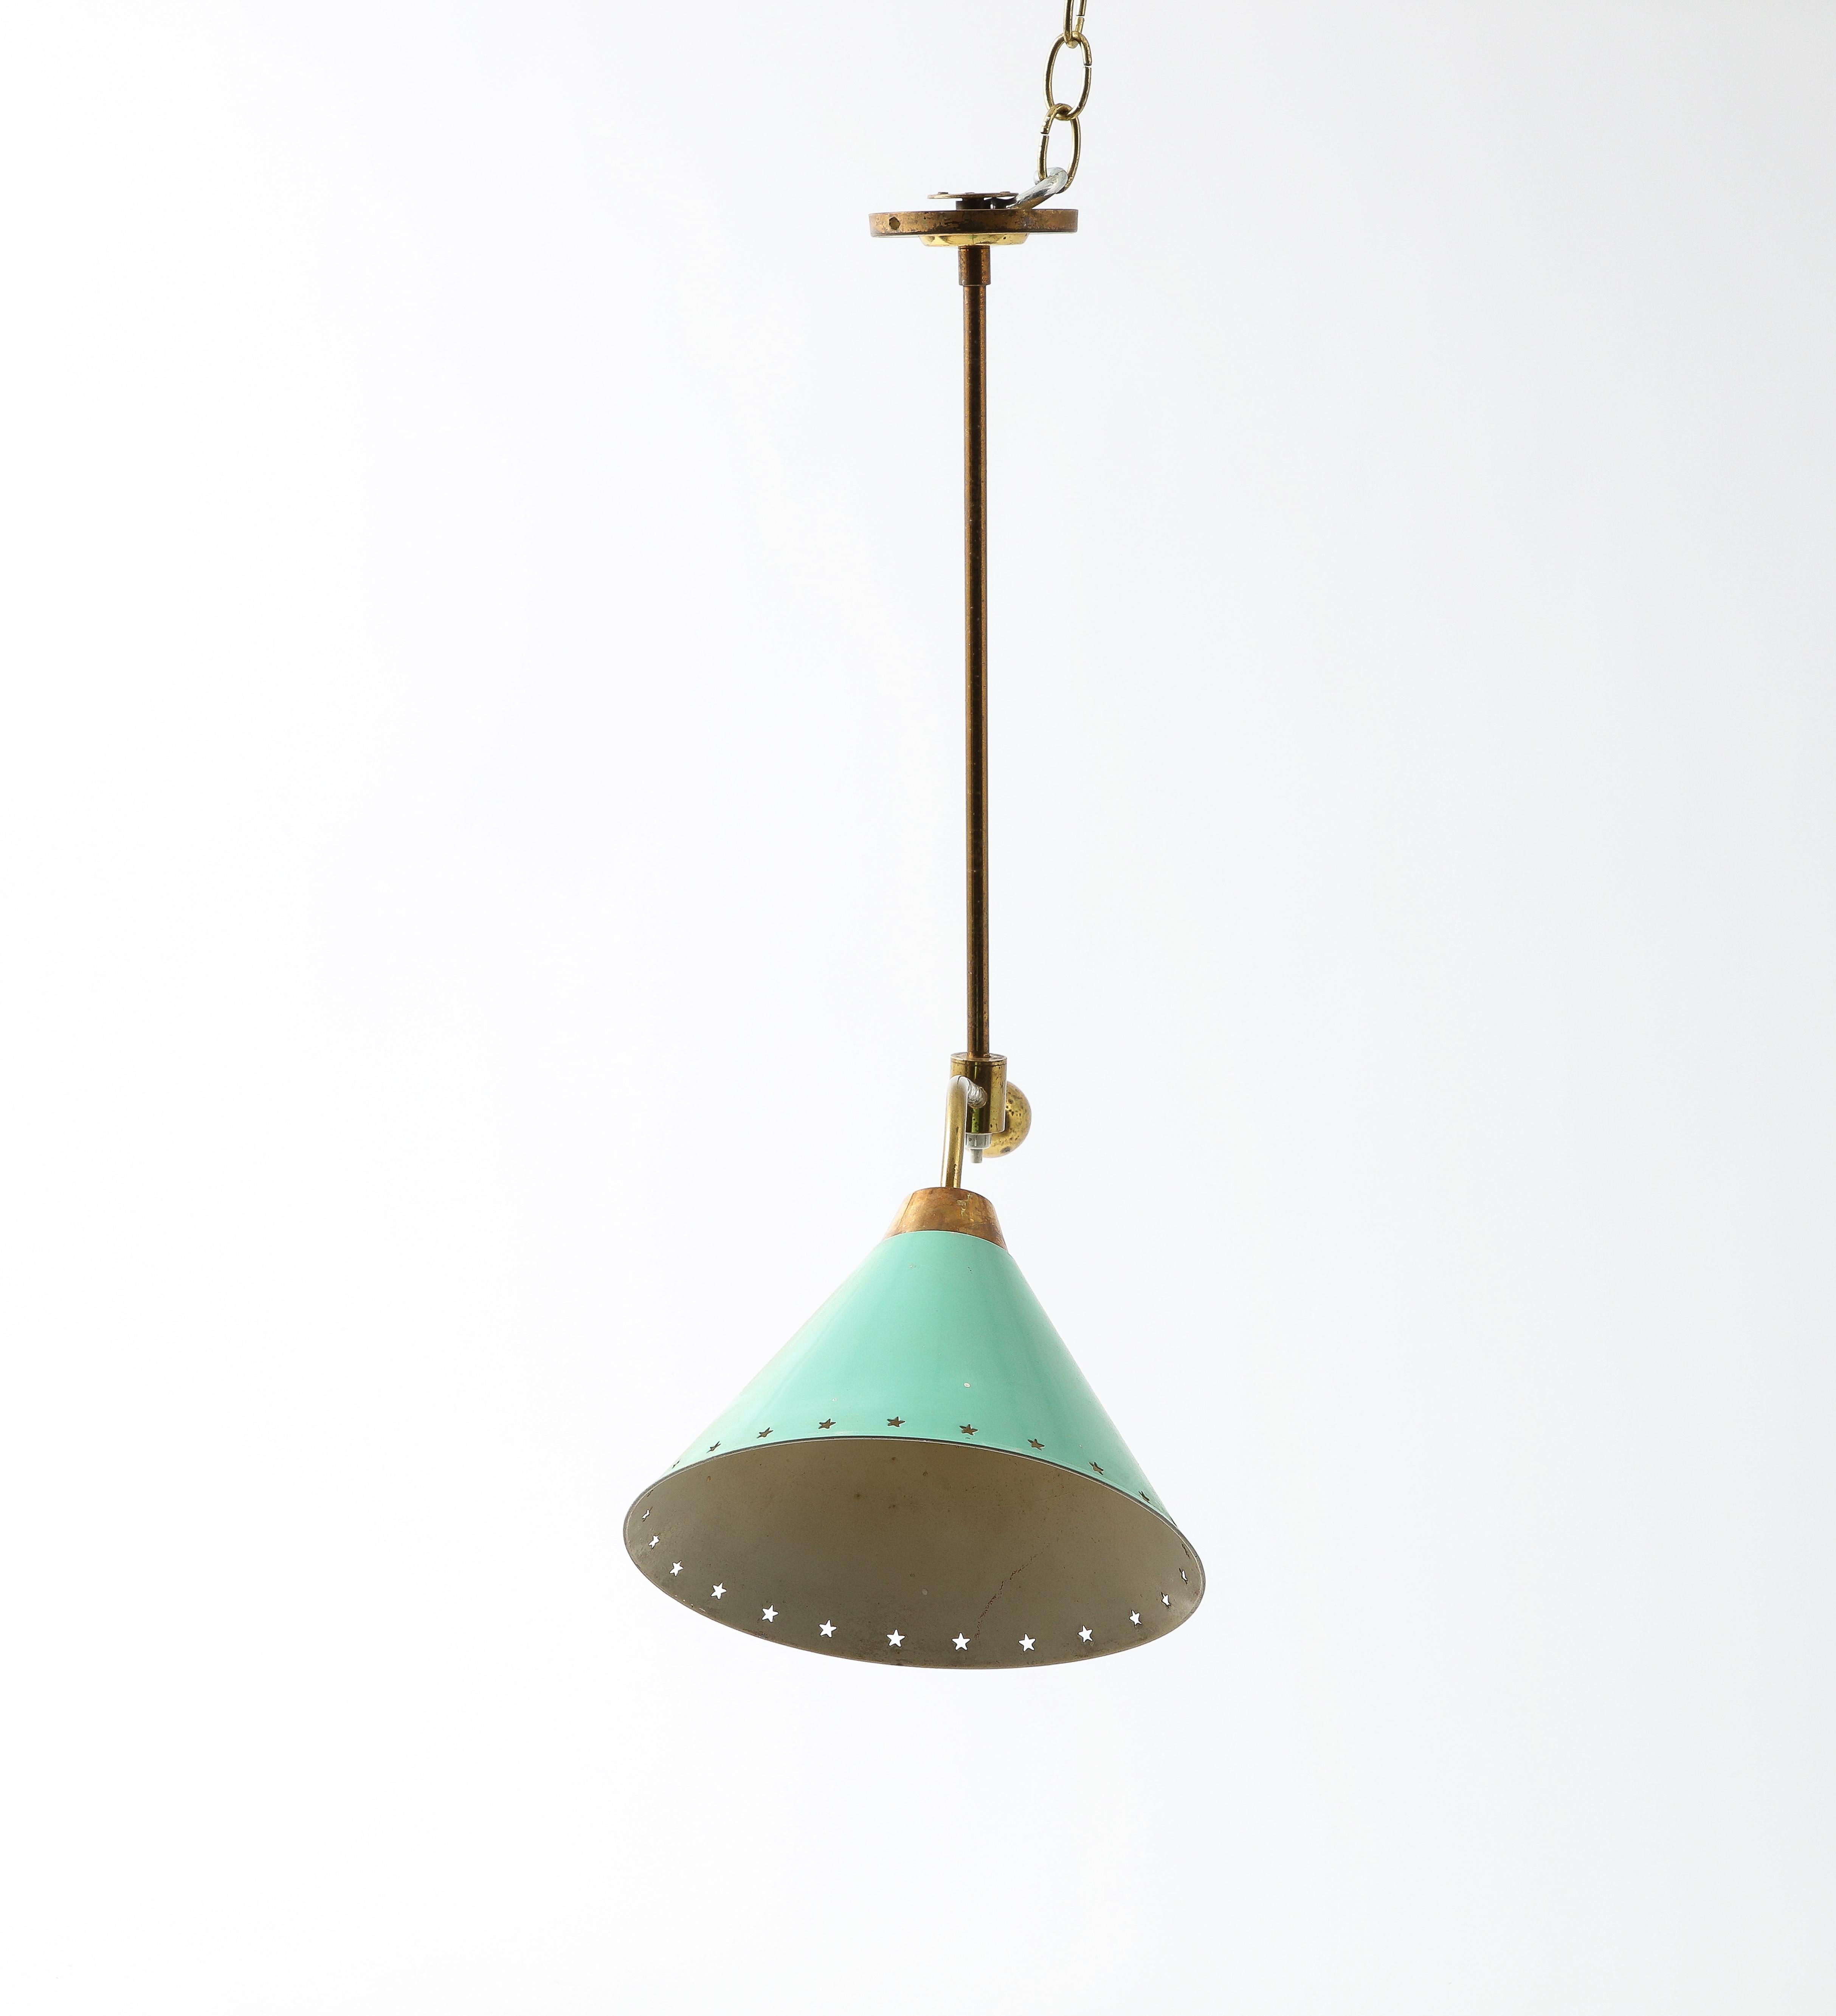 Arlus Brass Asymmetrical Ceiling Fixture with Green Shade, France 1960's For Sale 3